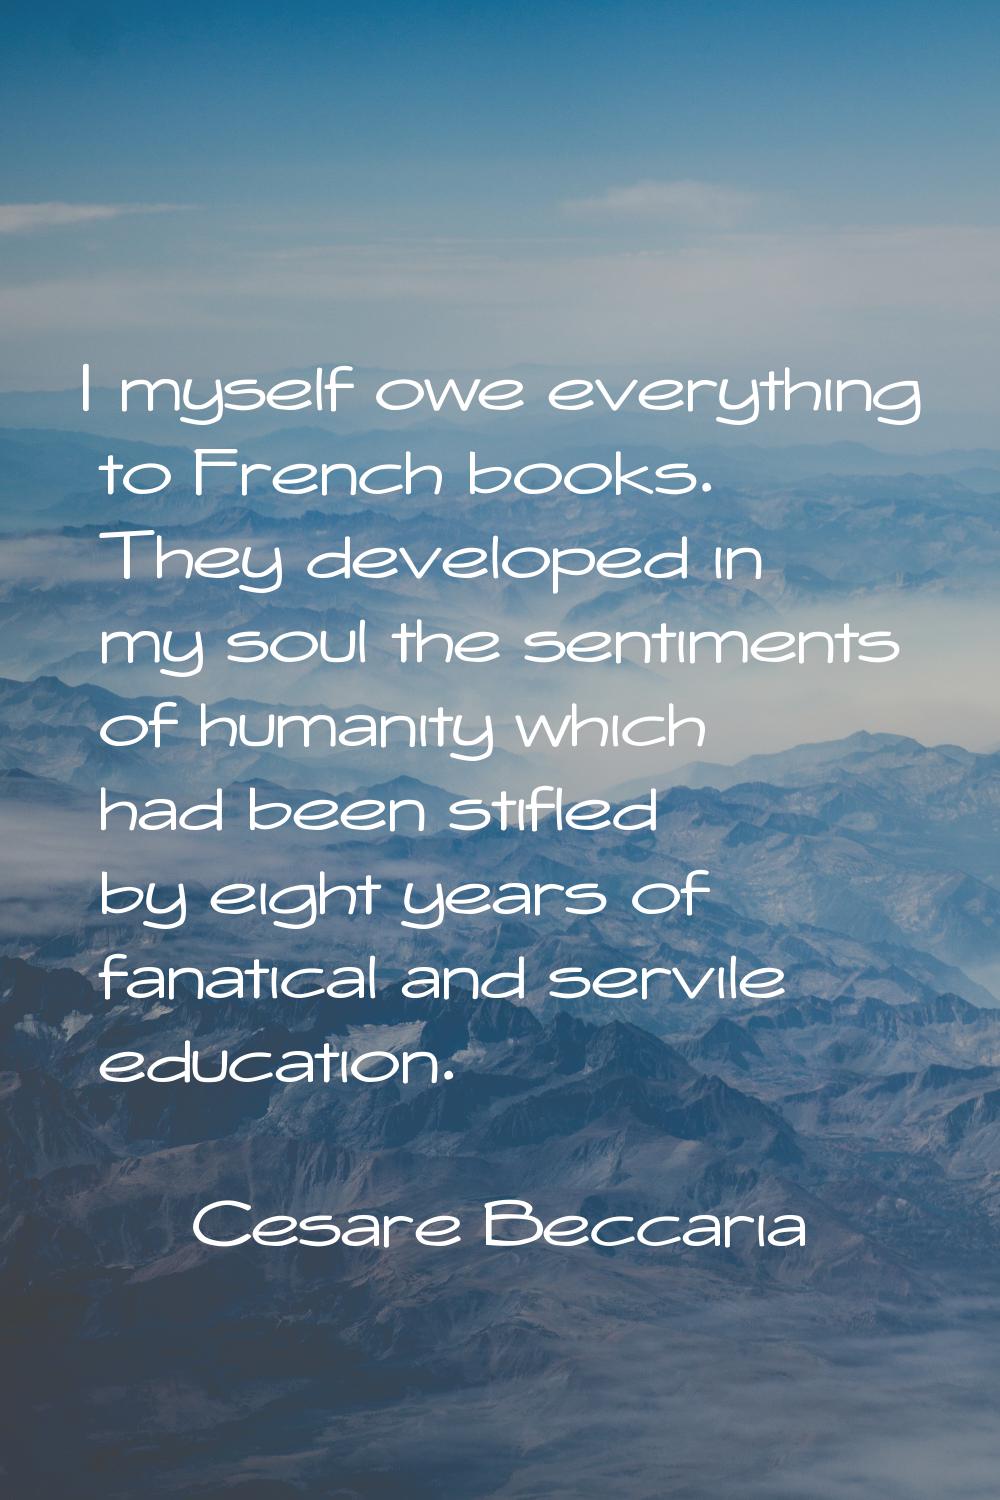 I myself owe everything to French books. They developed in my soul the sentiments of humanity which